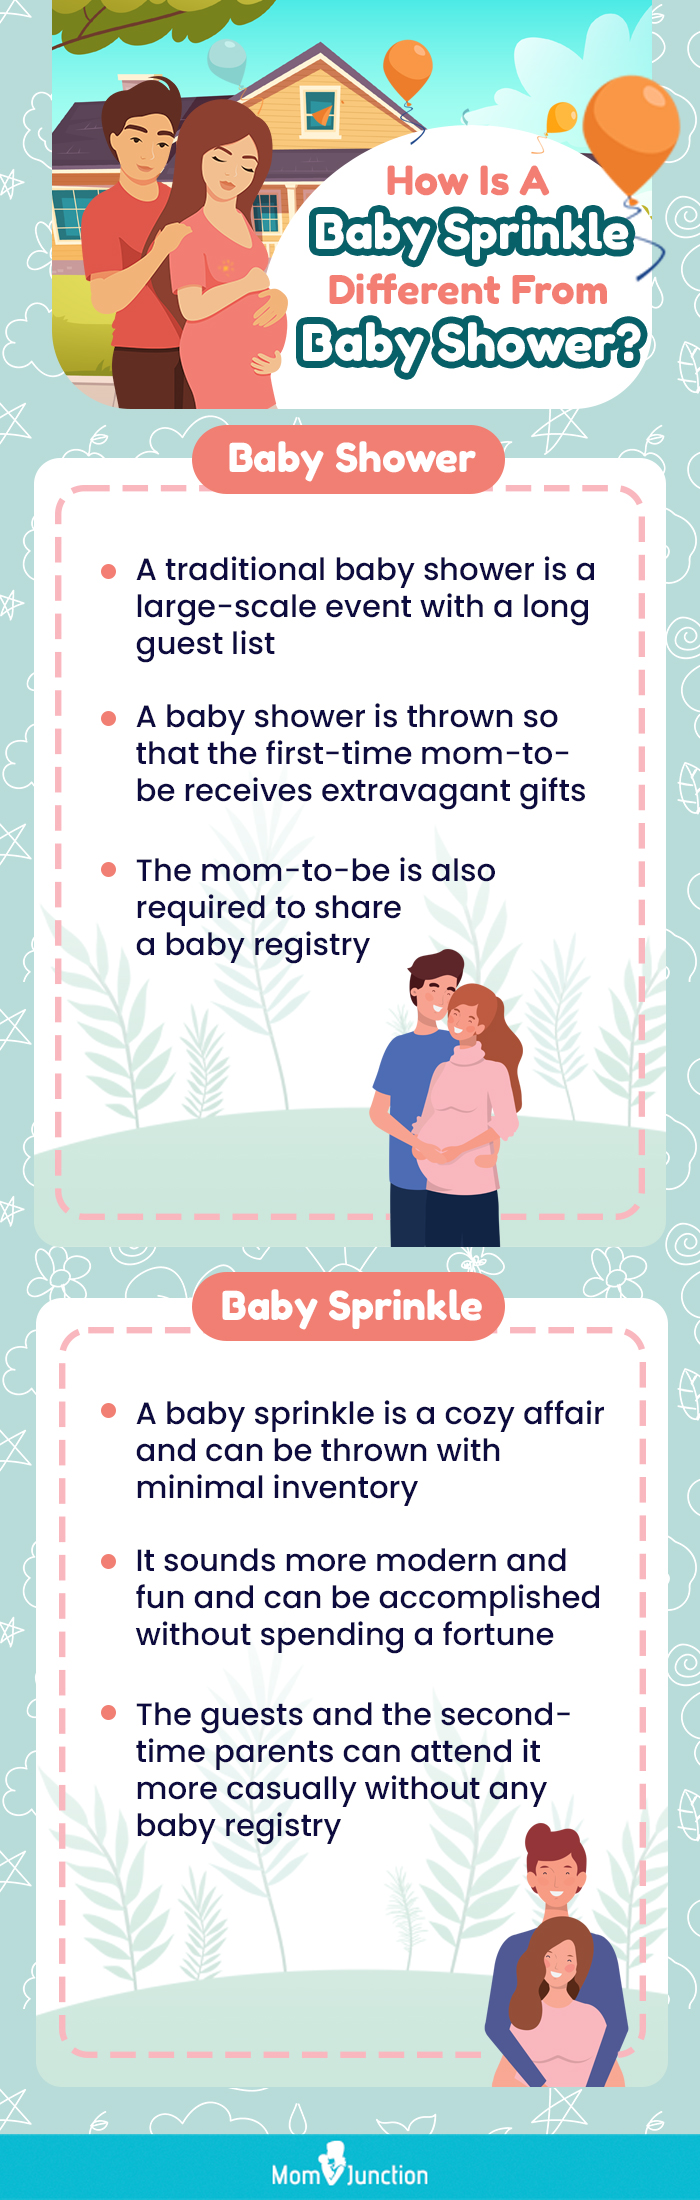 baby shower vs baby sprinkle (infographic)